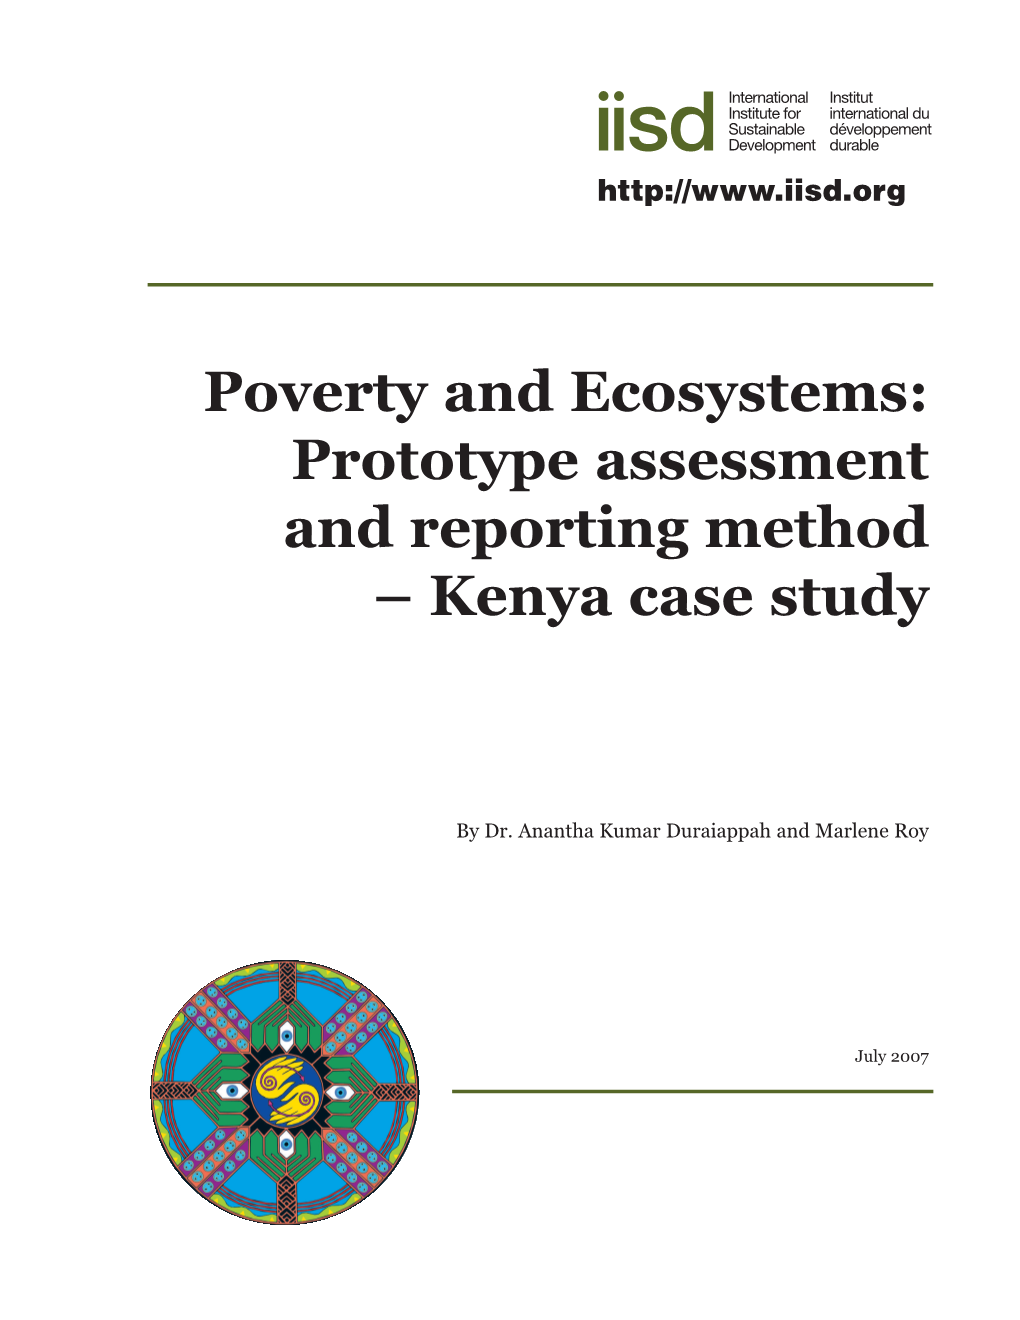 Poverty and Ecosystems: Prototype Assessment and Reporting Method – Kenya Case Study